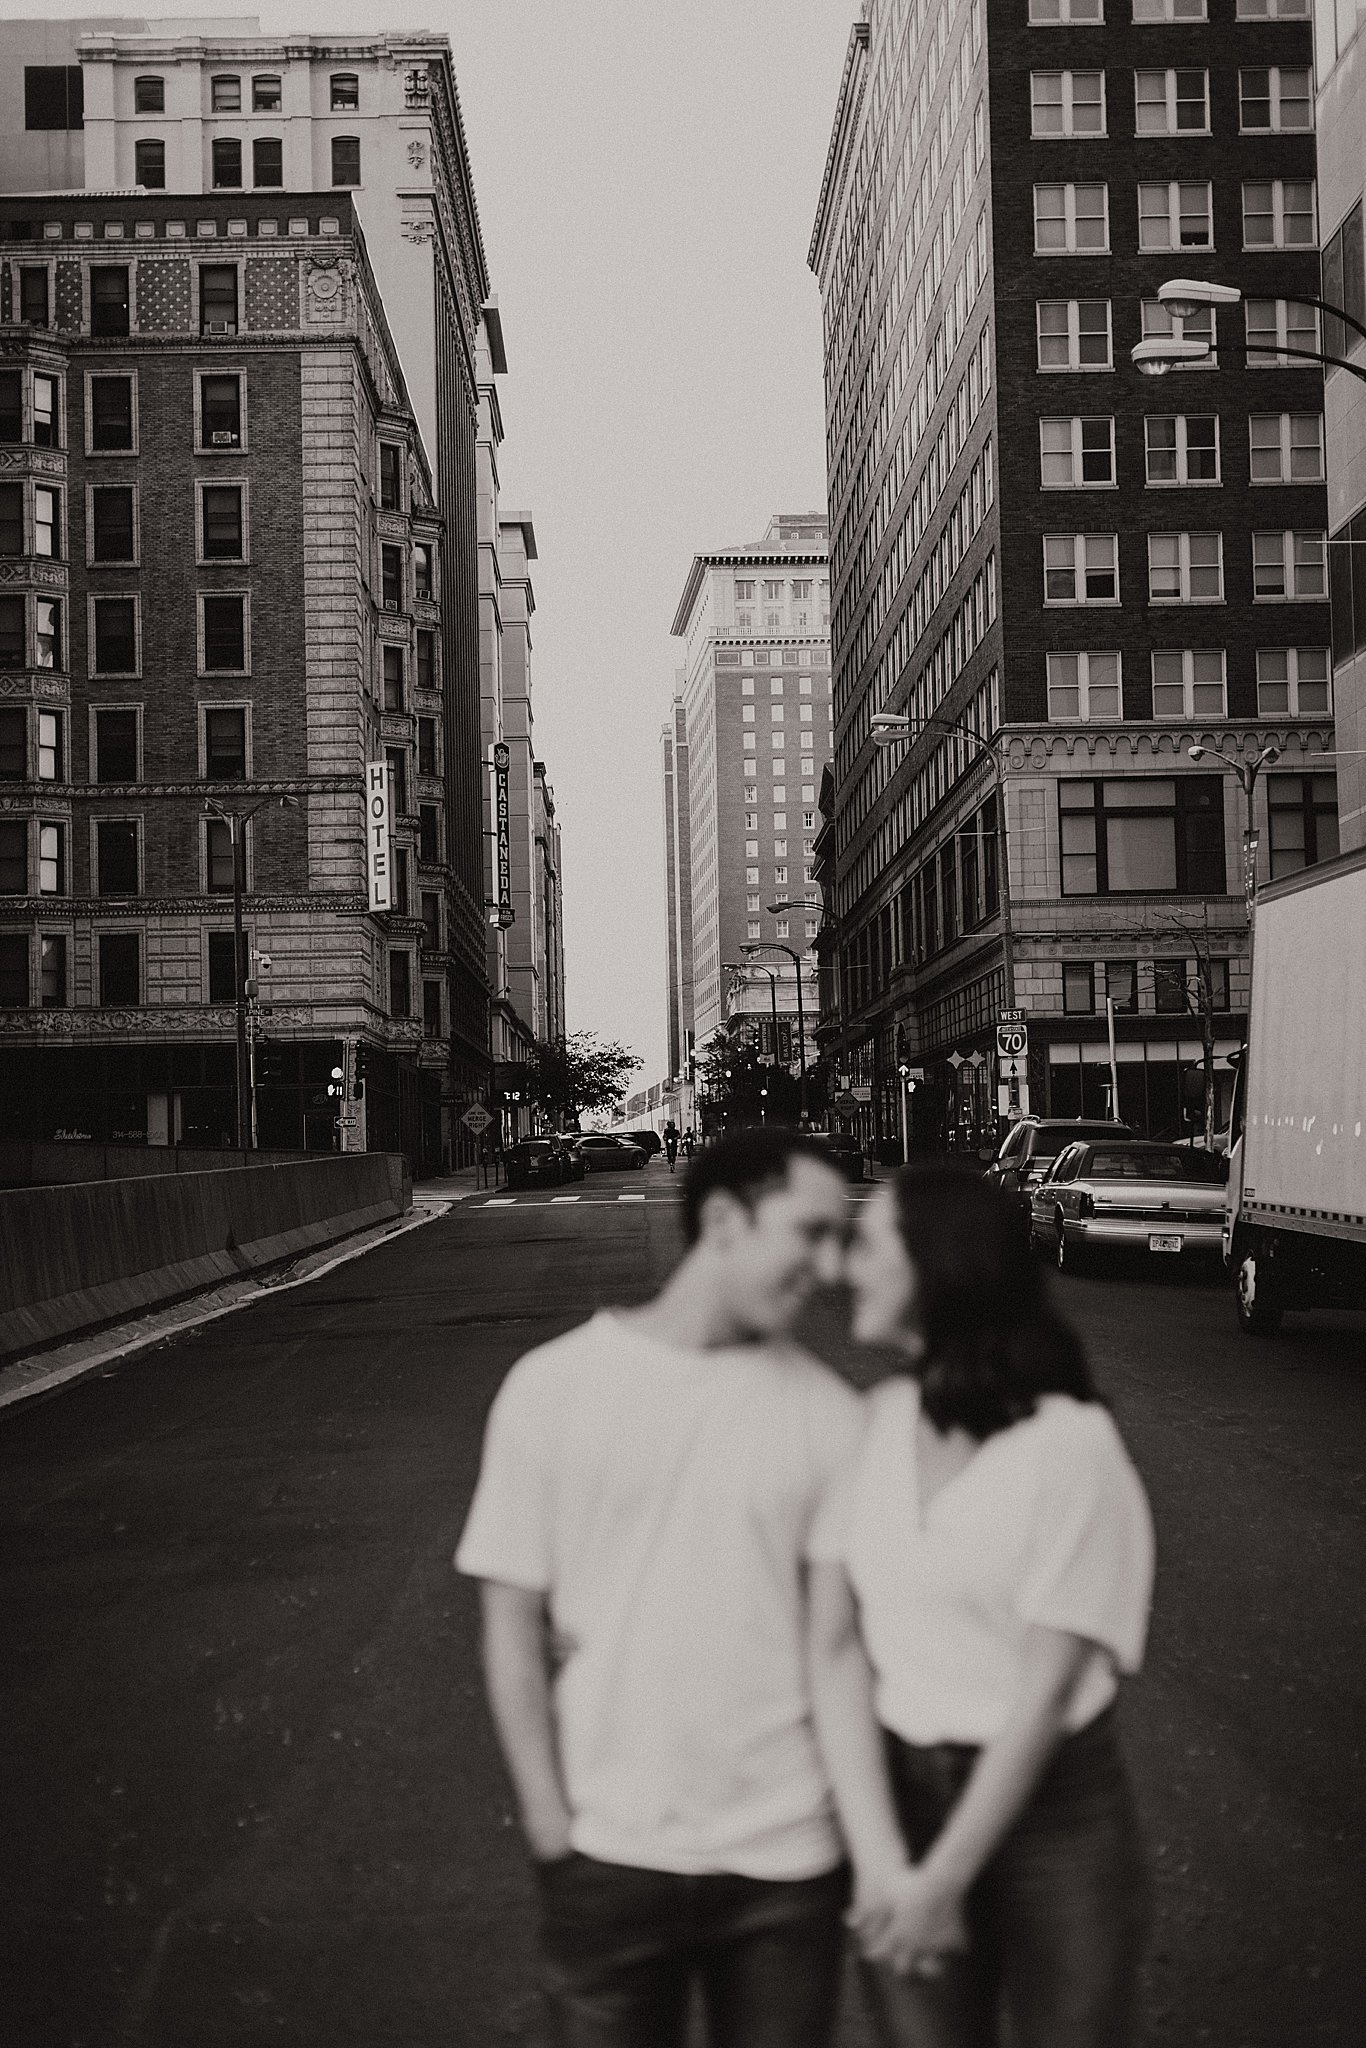 City Vibes Engagement Session Photos